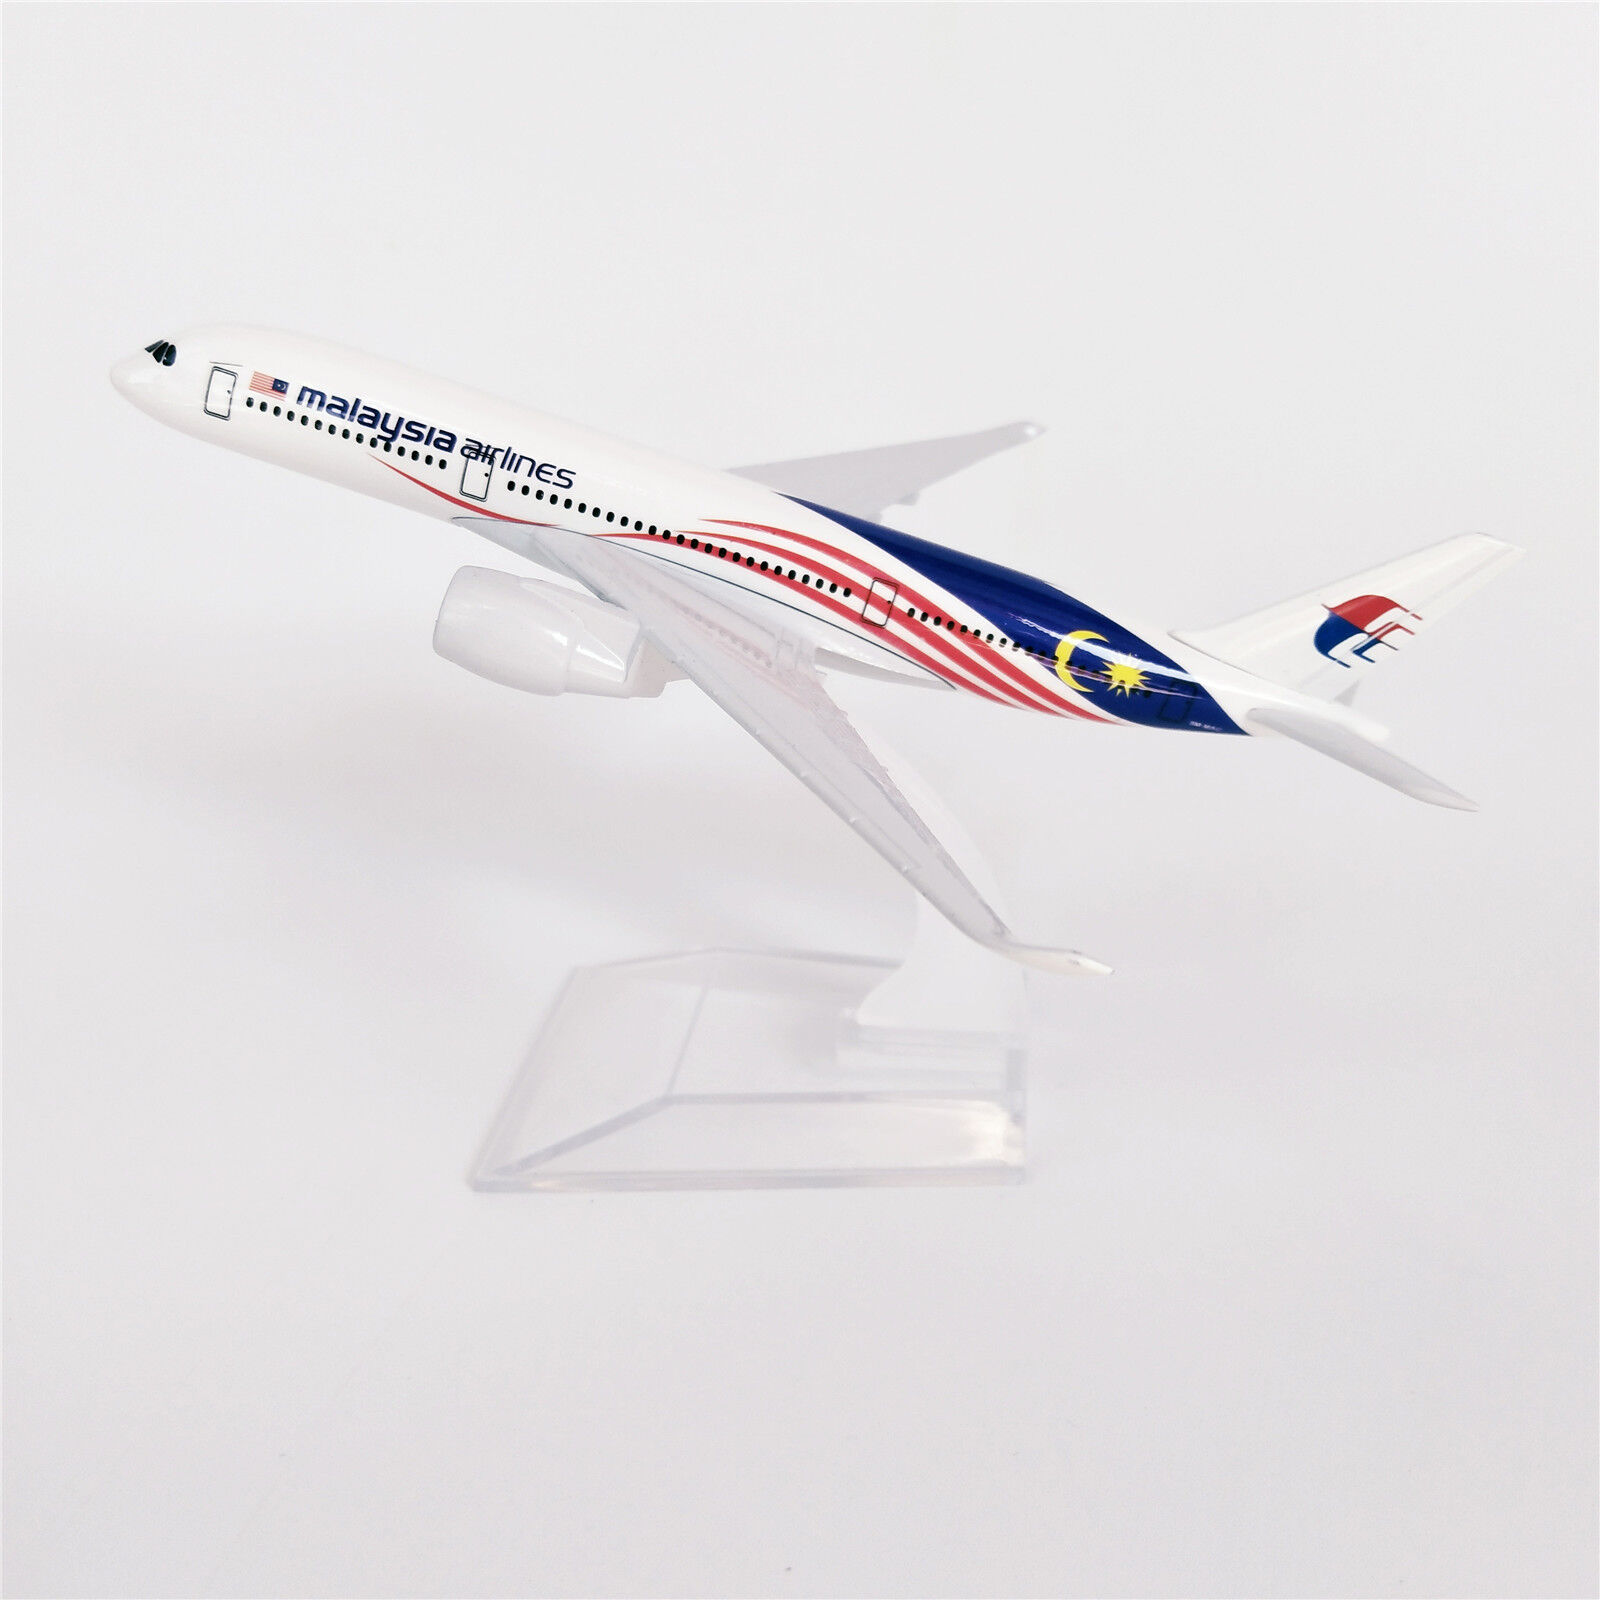 16cm Air Malaysia Airlines Airbus A350 Diecast Airplane Model Plane Aircraft 